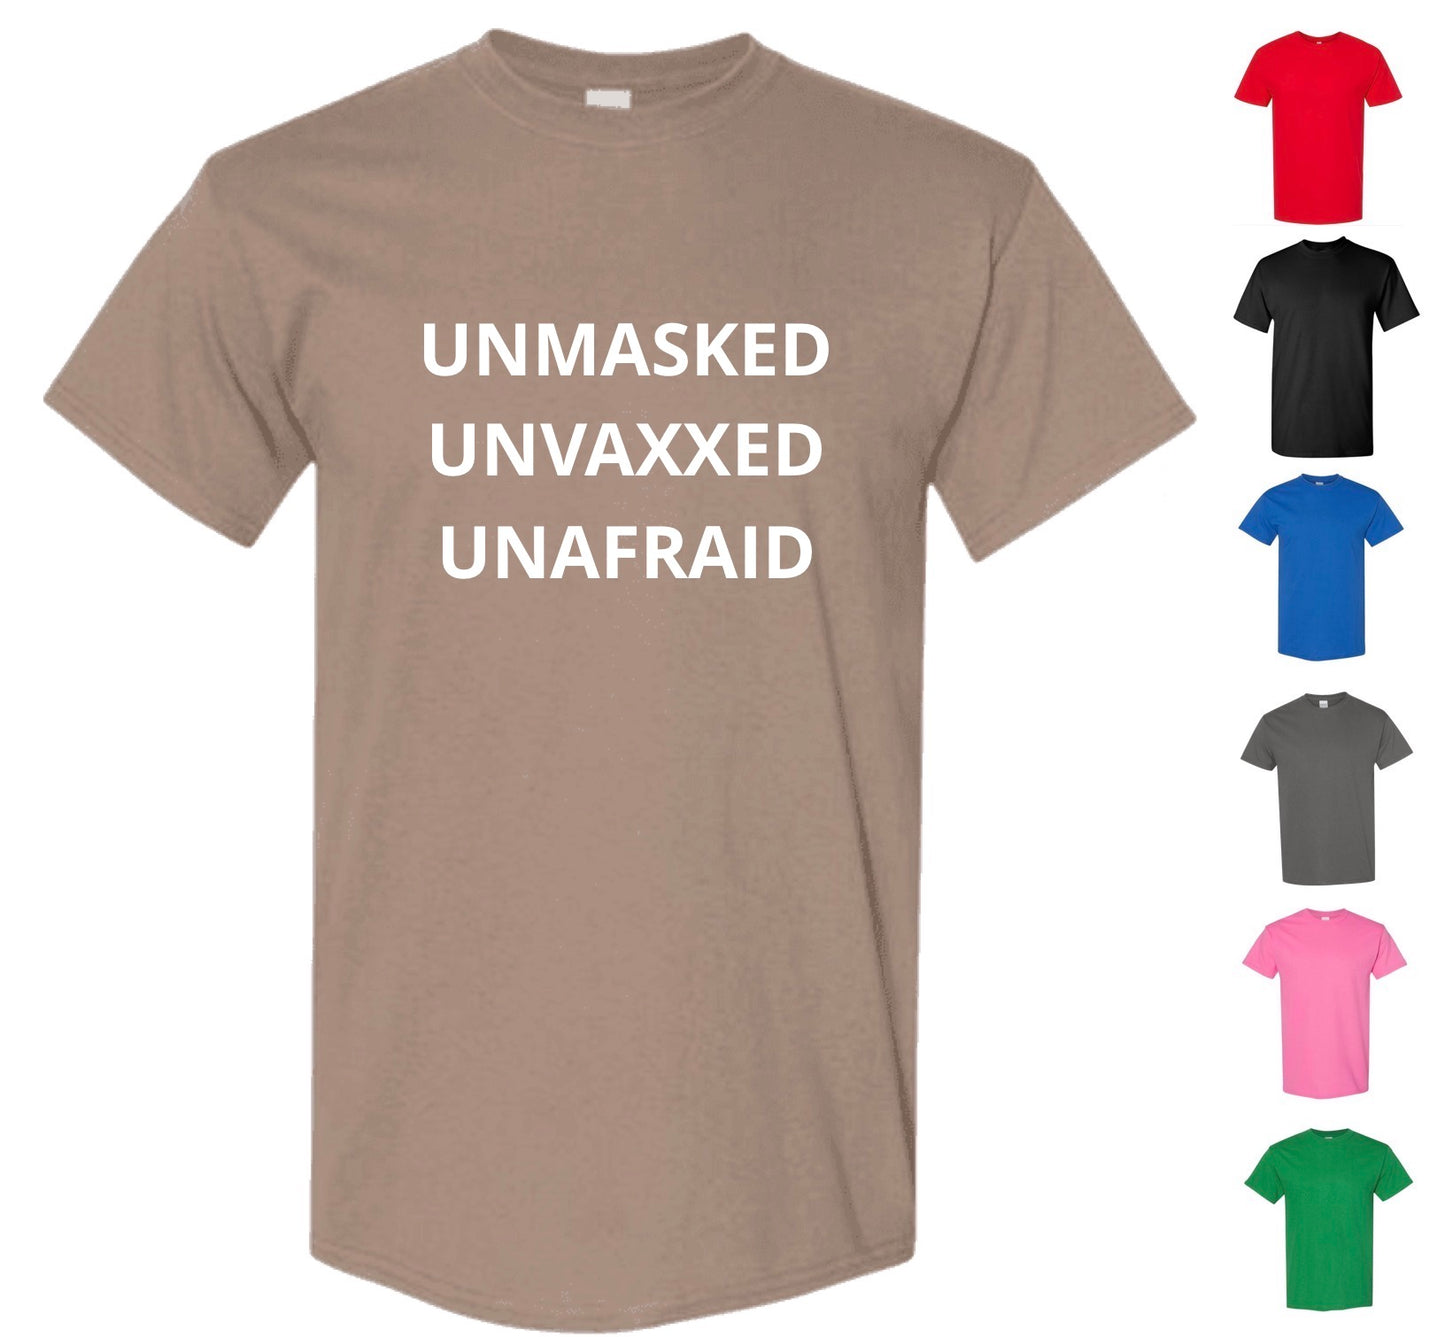 Unmasked, Unvaxxed, and Unafraid T-Shirt (FREE Shipping!)